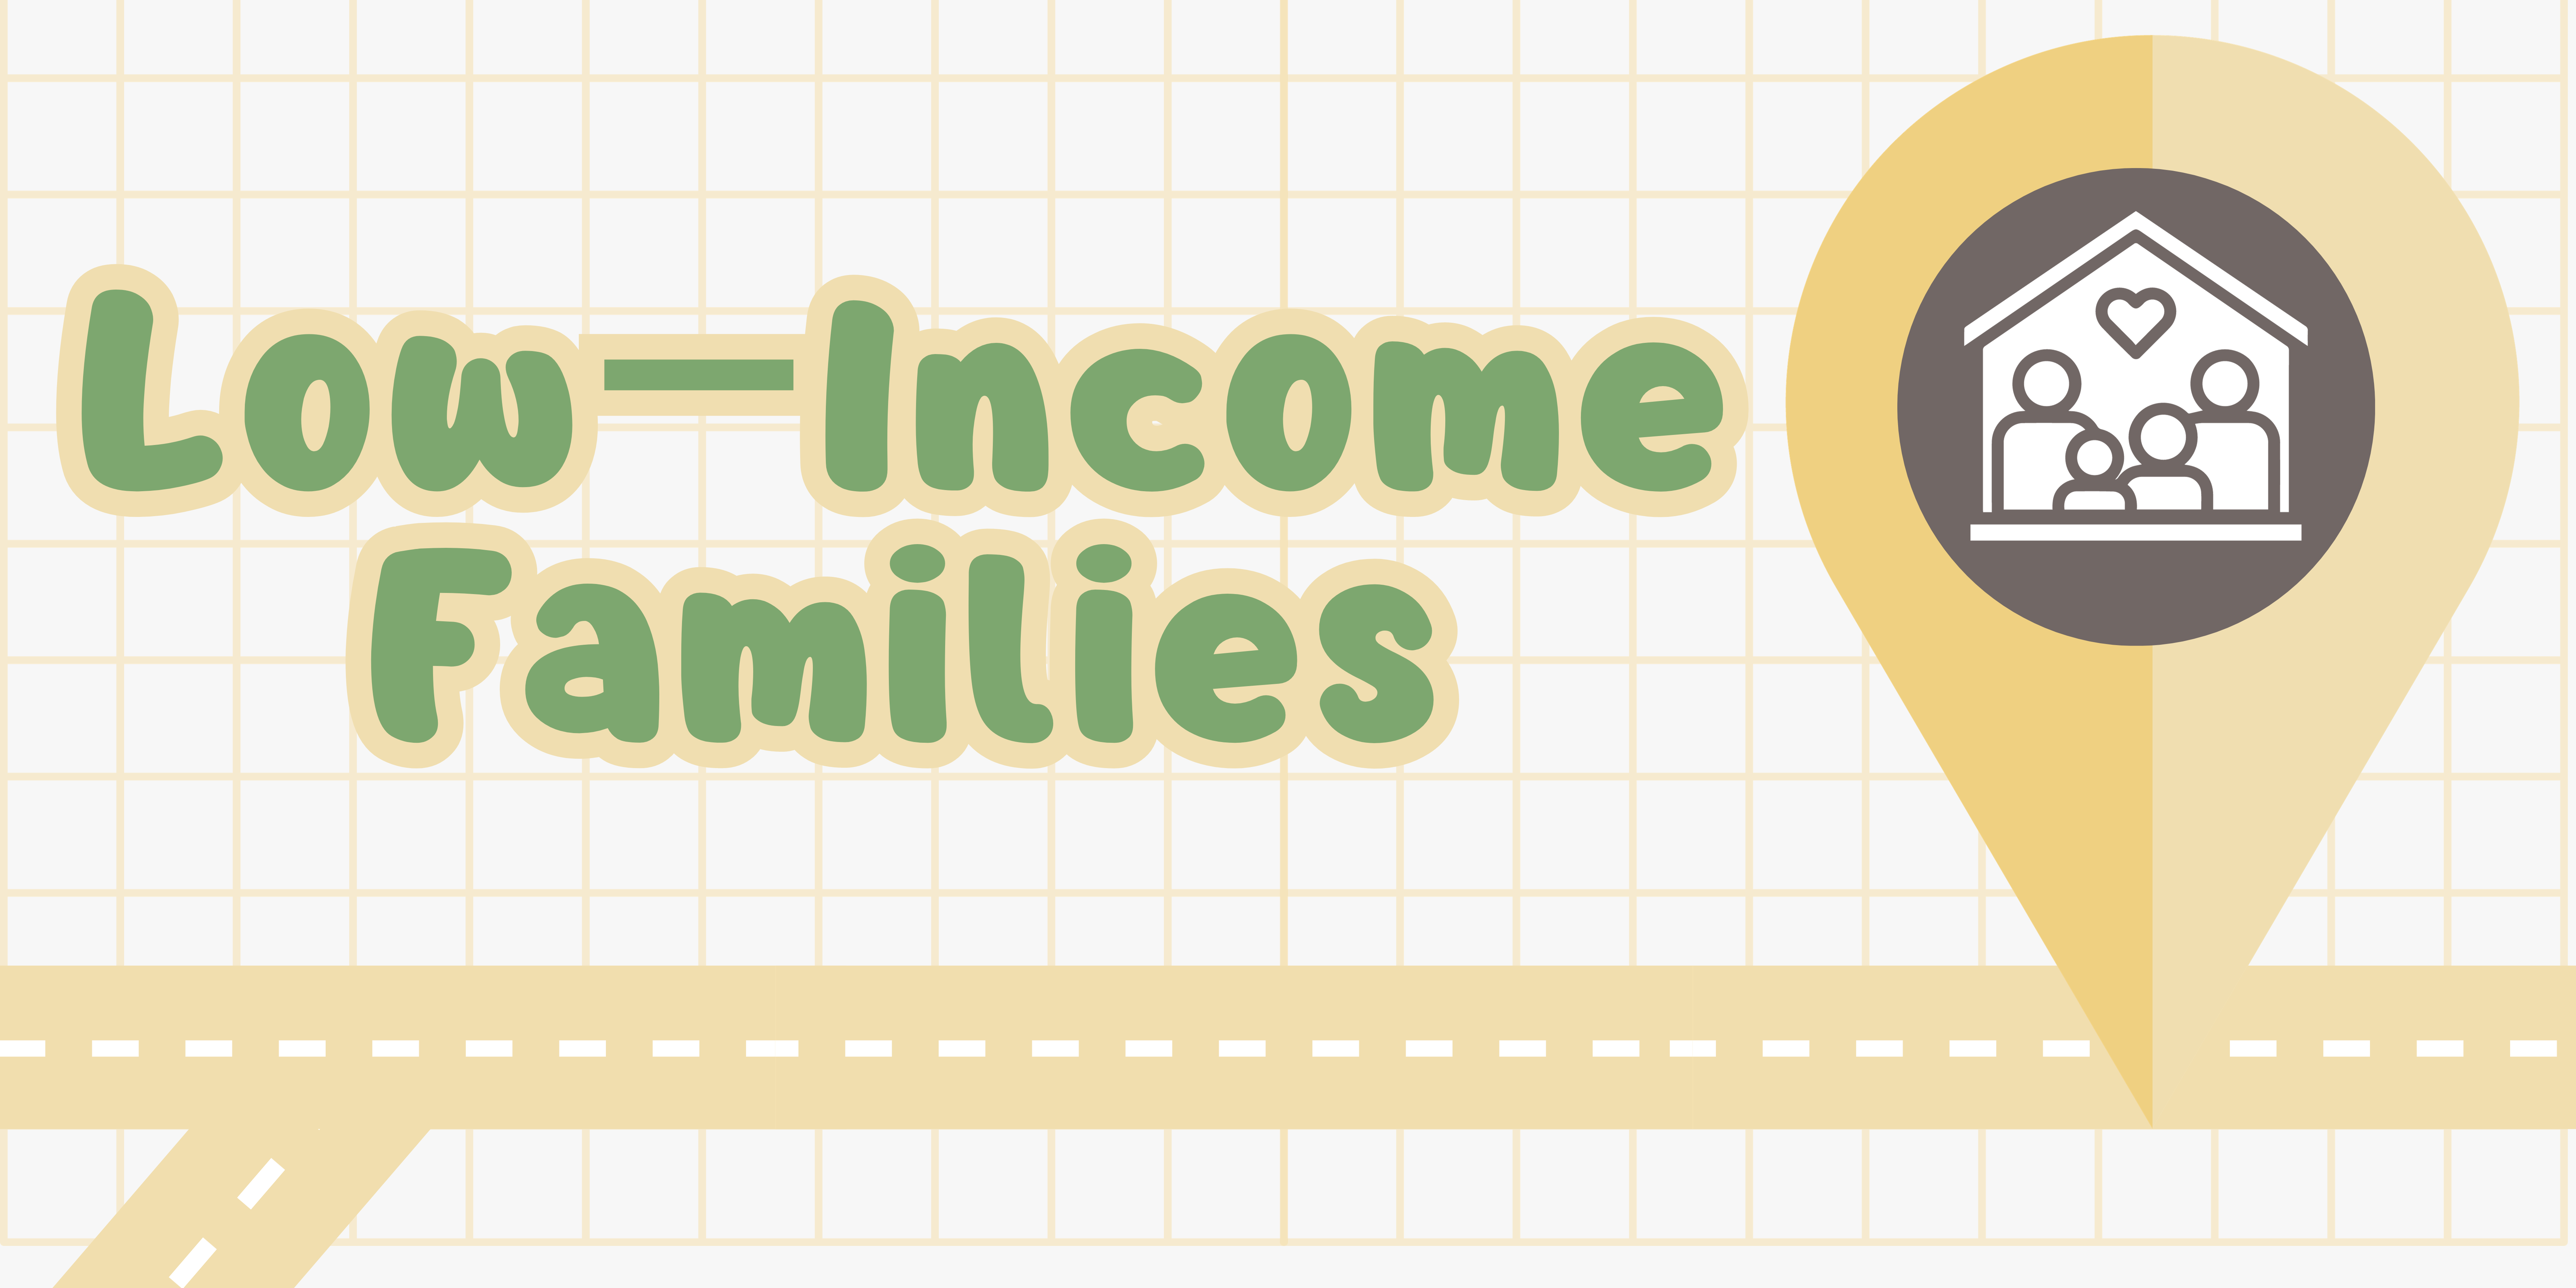 Low-income families